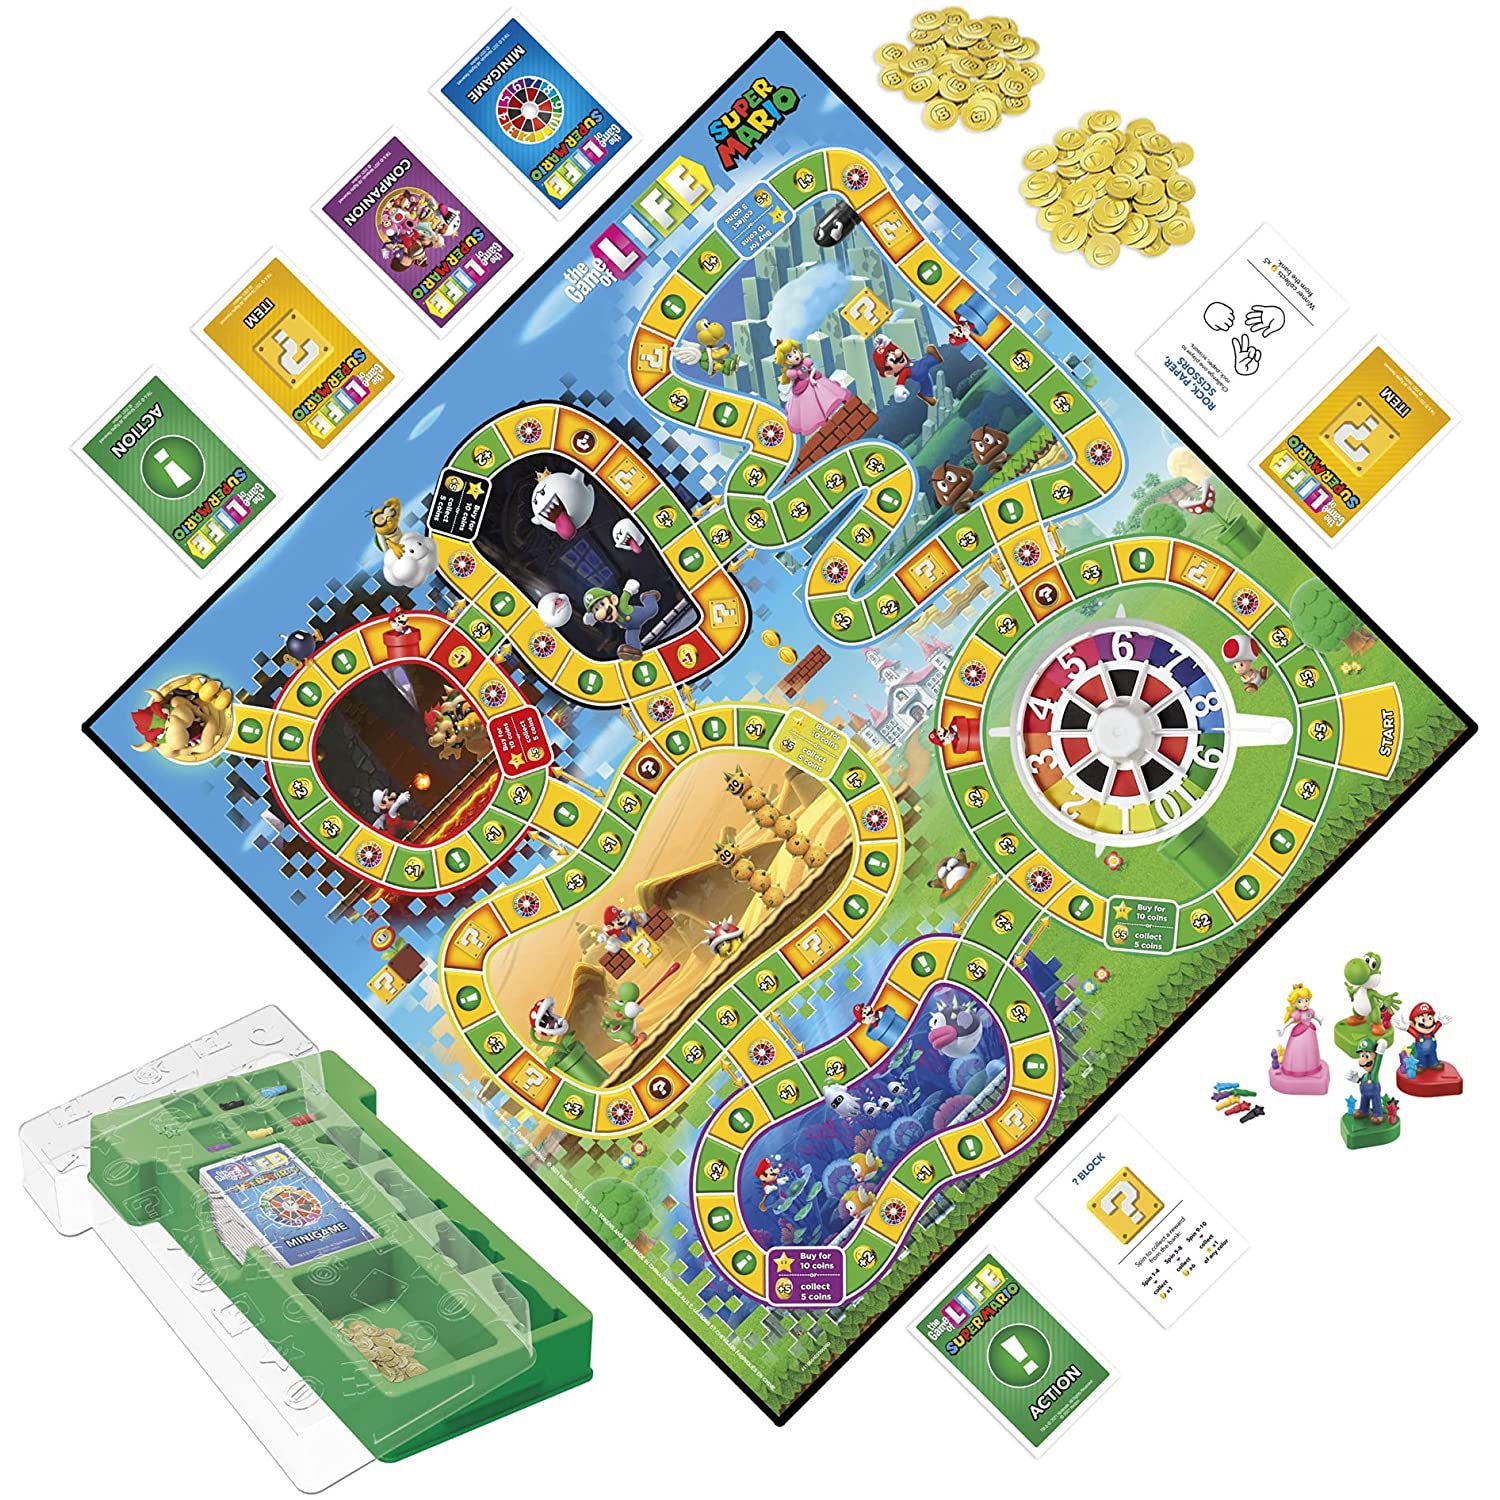 The Game of Life: Super Mario Edition Board Game